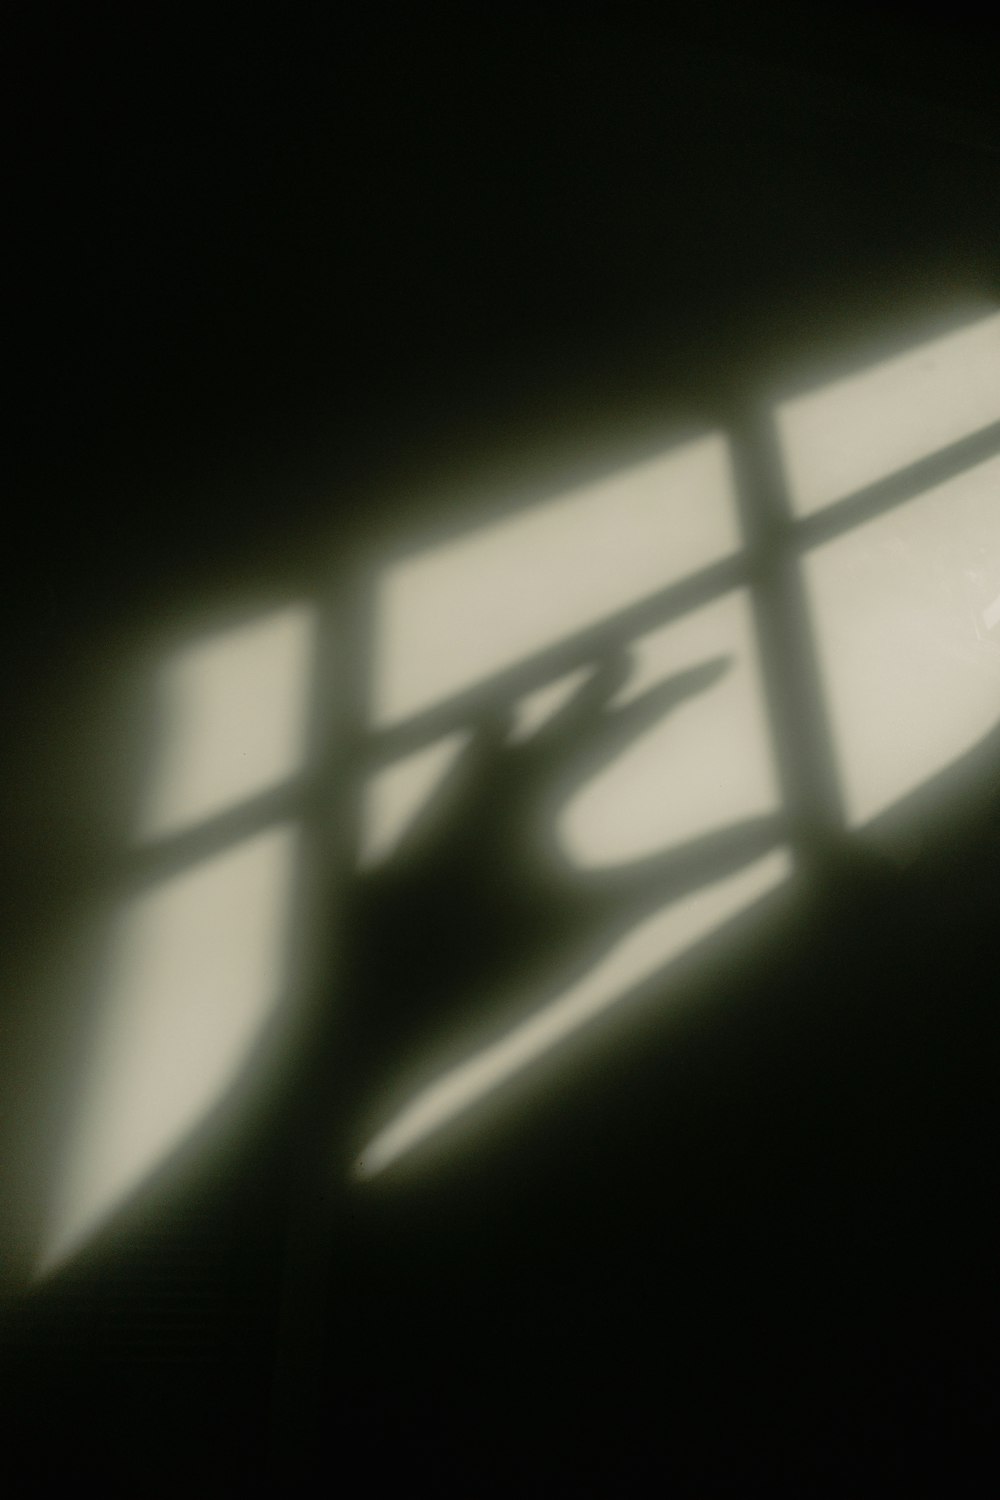 the shadow of a person's hand on a window sill